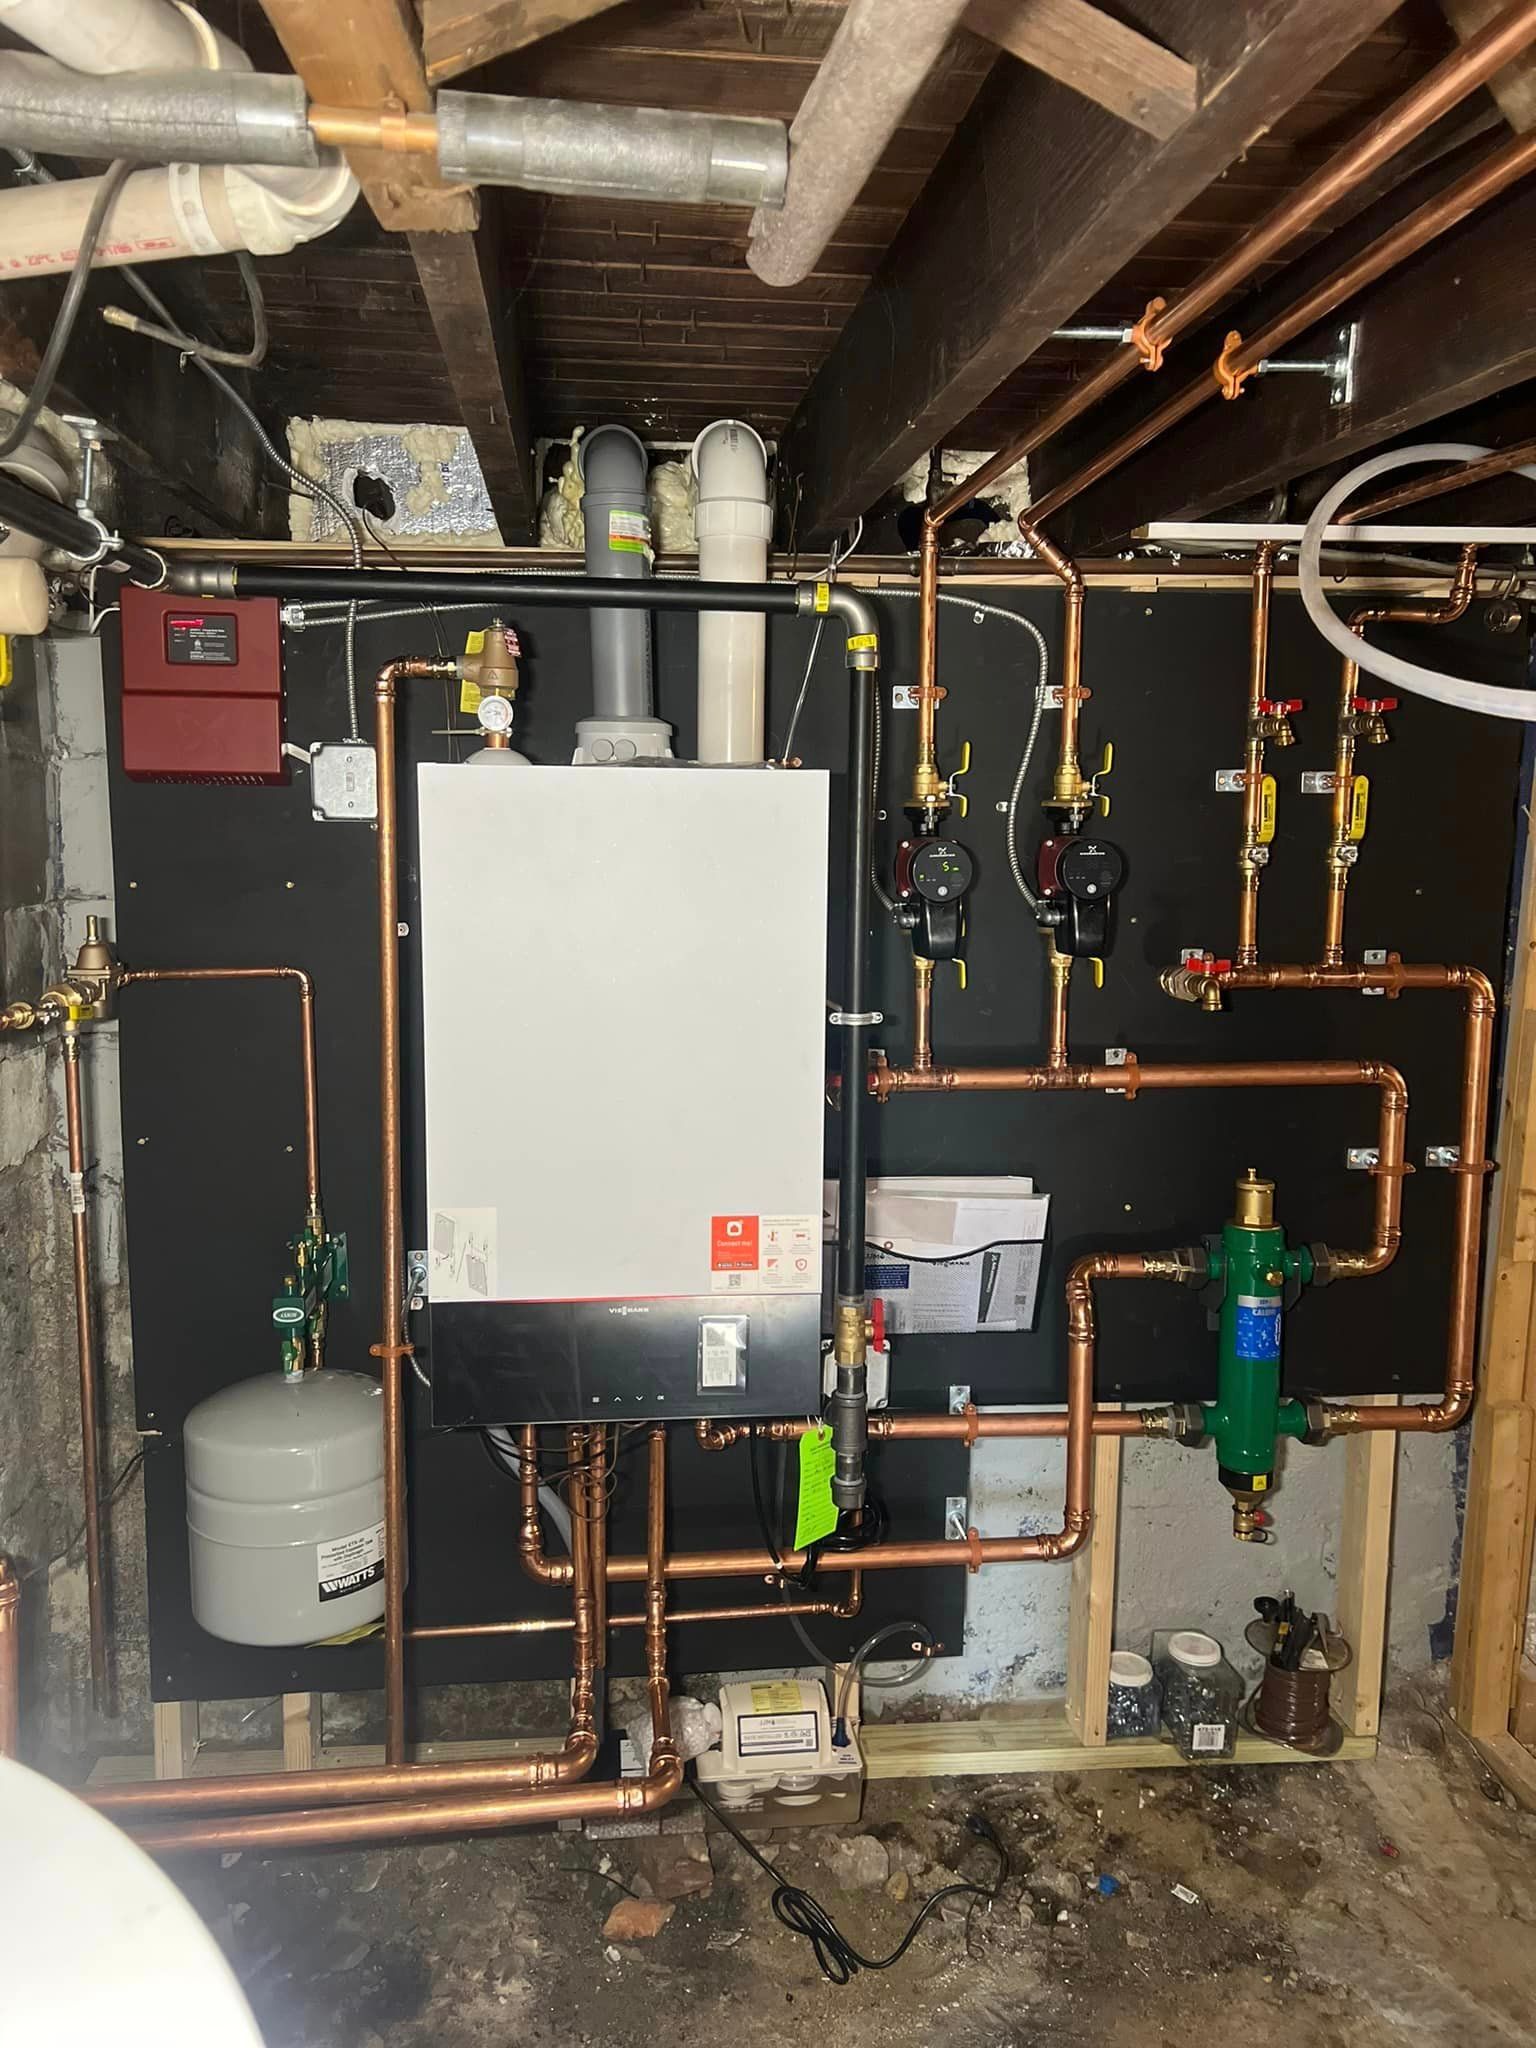 Dale Plumbing tankless water heater installation servicing in  Massachusetts Regions